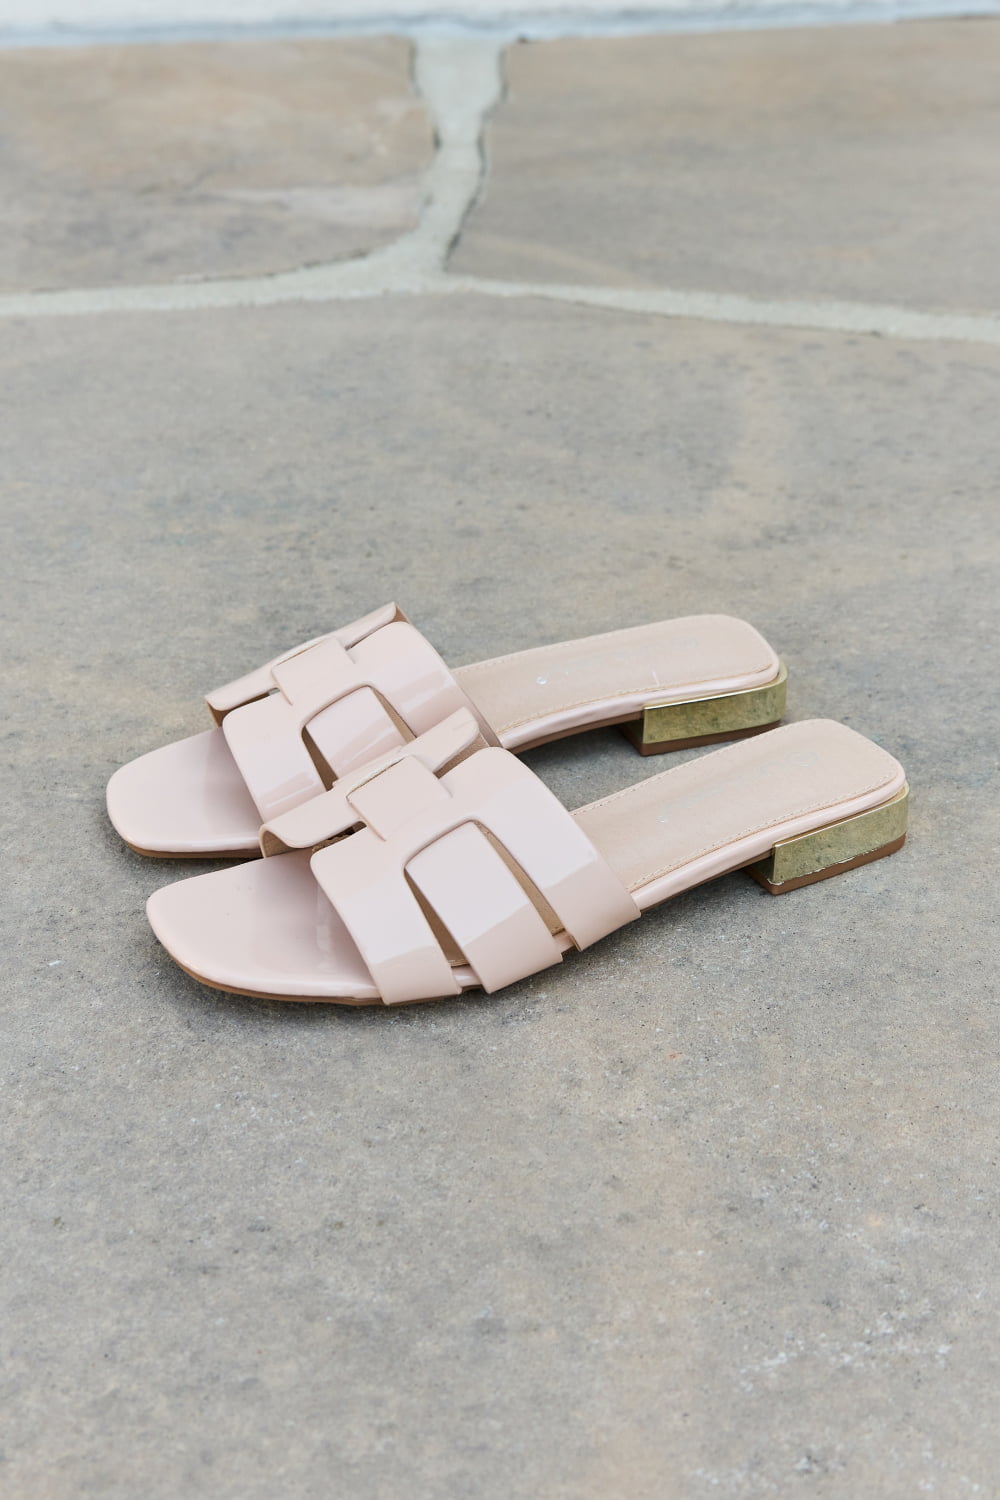 Weeboo Walk It Out Slide Sandals in Nude - Cheeky Chic Boutique